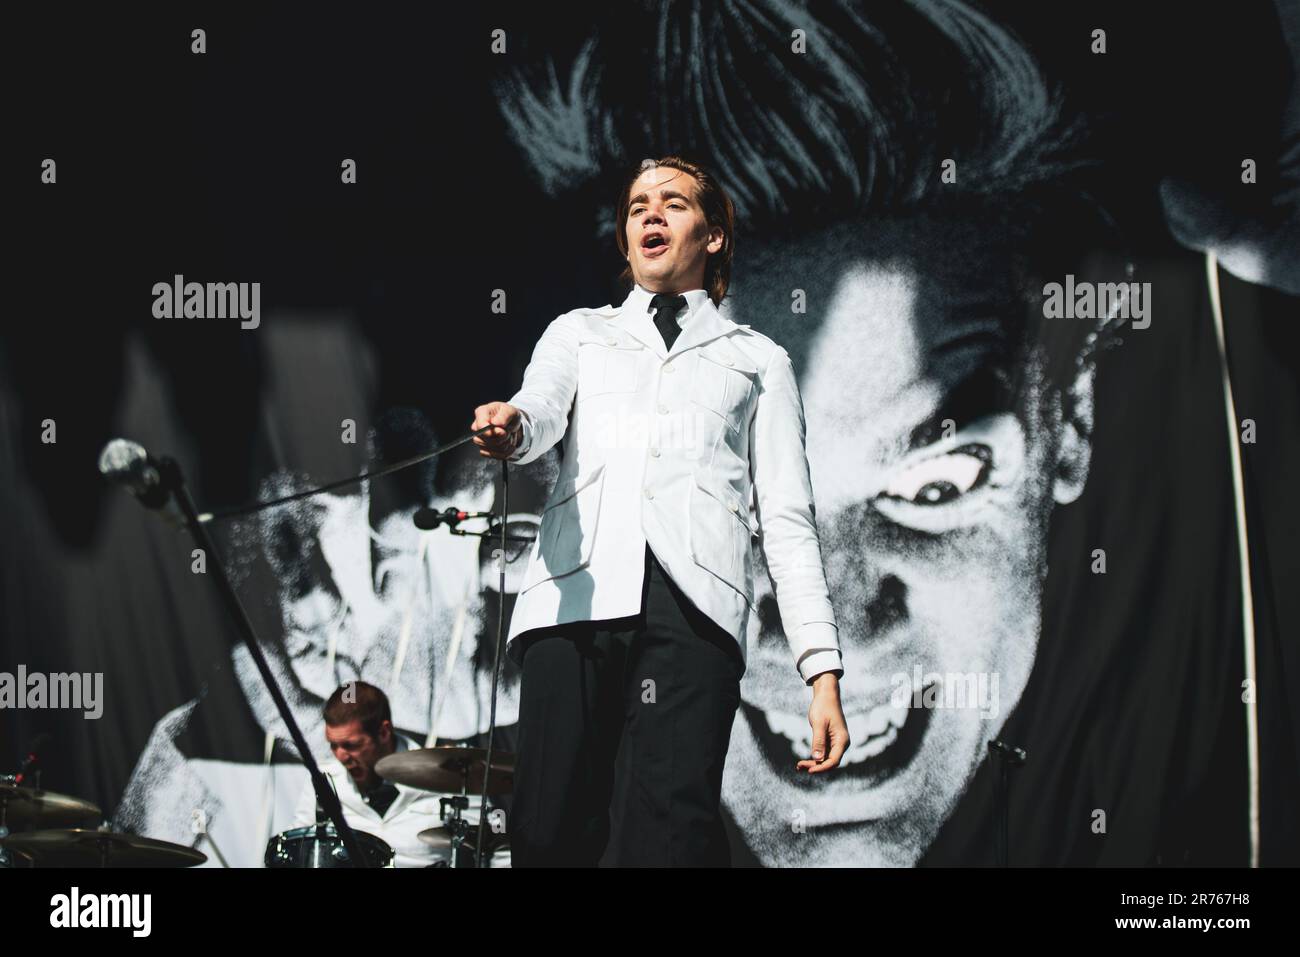 MUNICH, GERMANY ROCKAVARIA FESTIVAL: Per “Pelle” Almqvist, also known as Howlin' Pelle Almqvis, singer of the Swedish band The Hives performing live on stage at the first edition of the Rockavaria Festival. Stock Photo